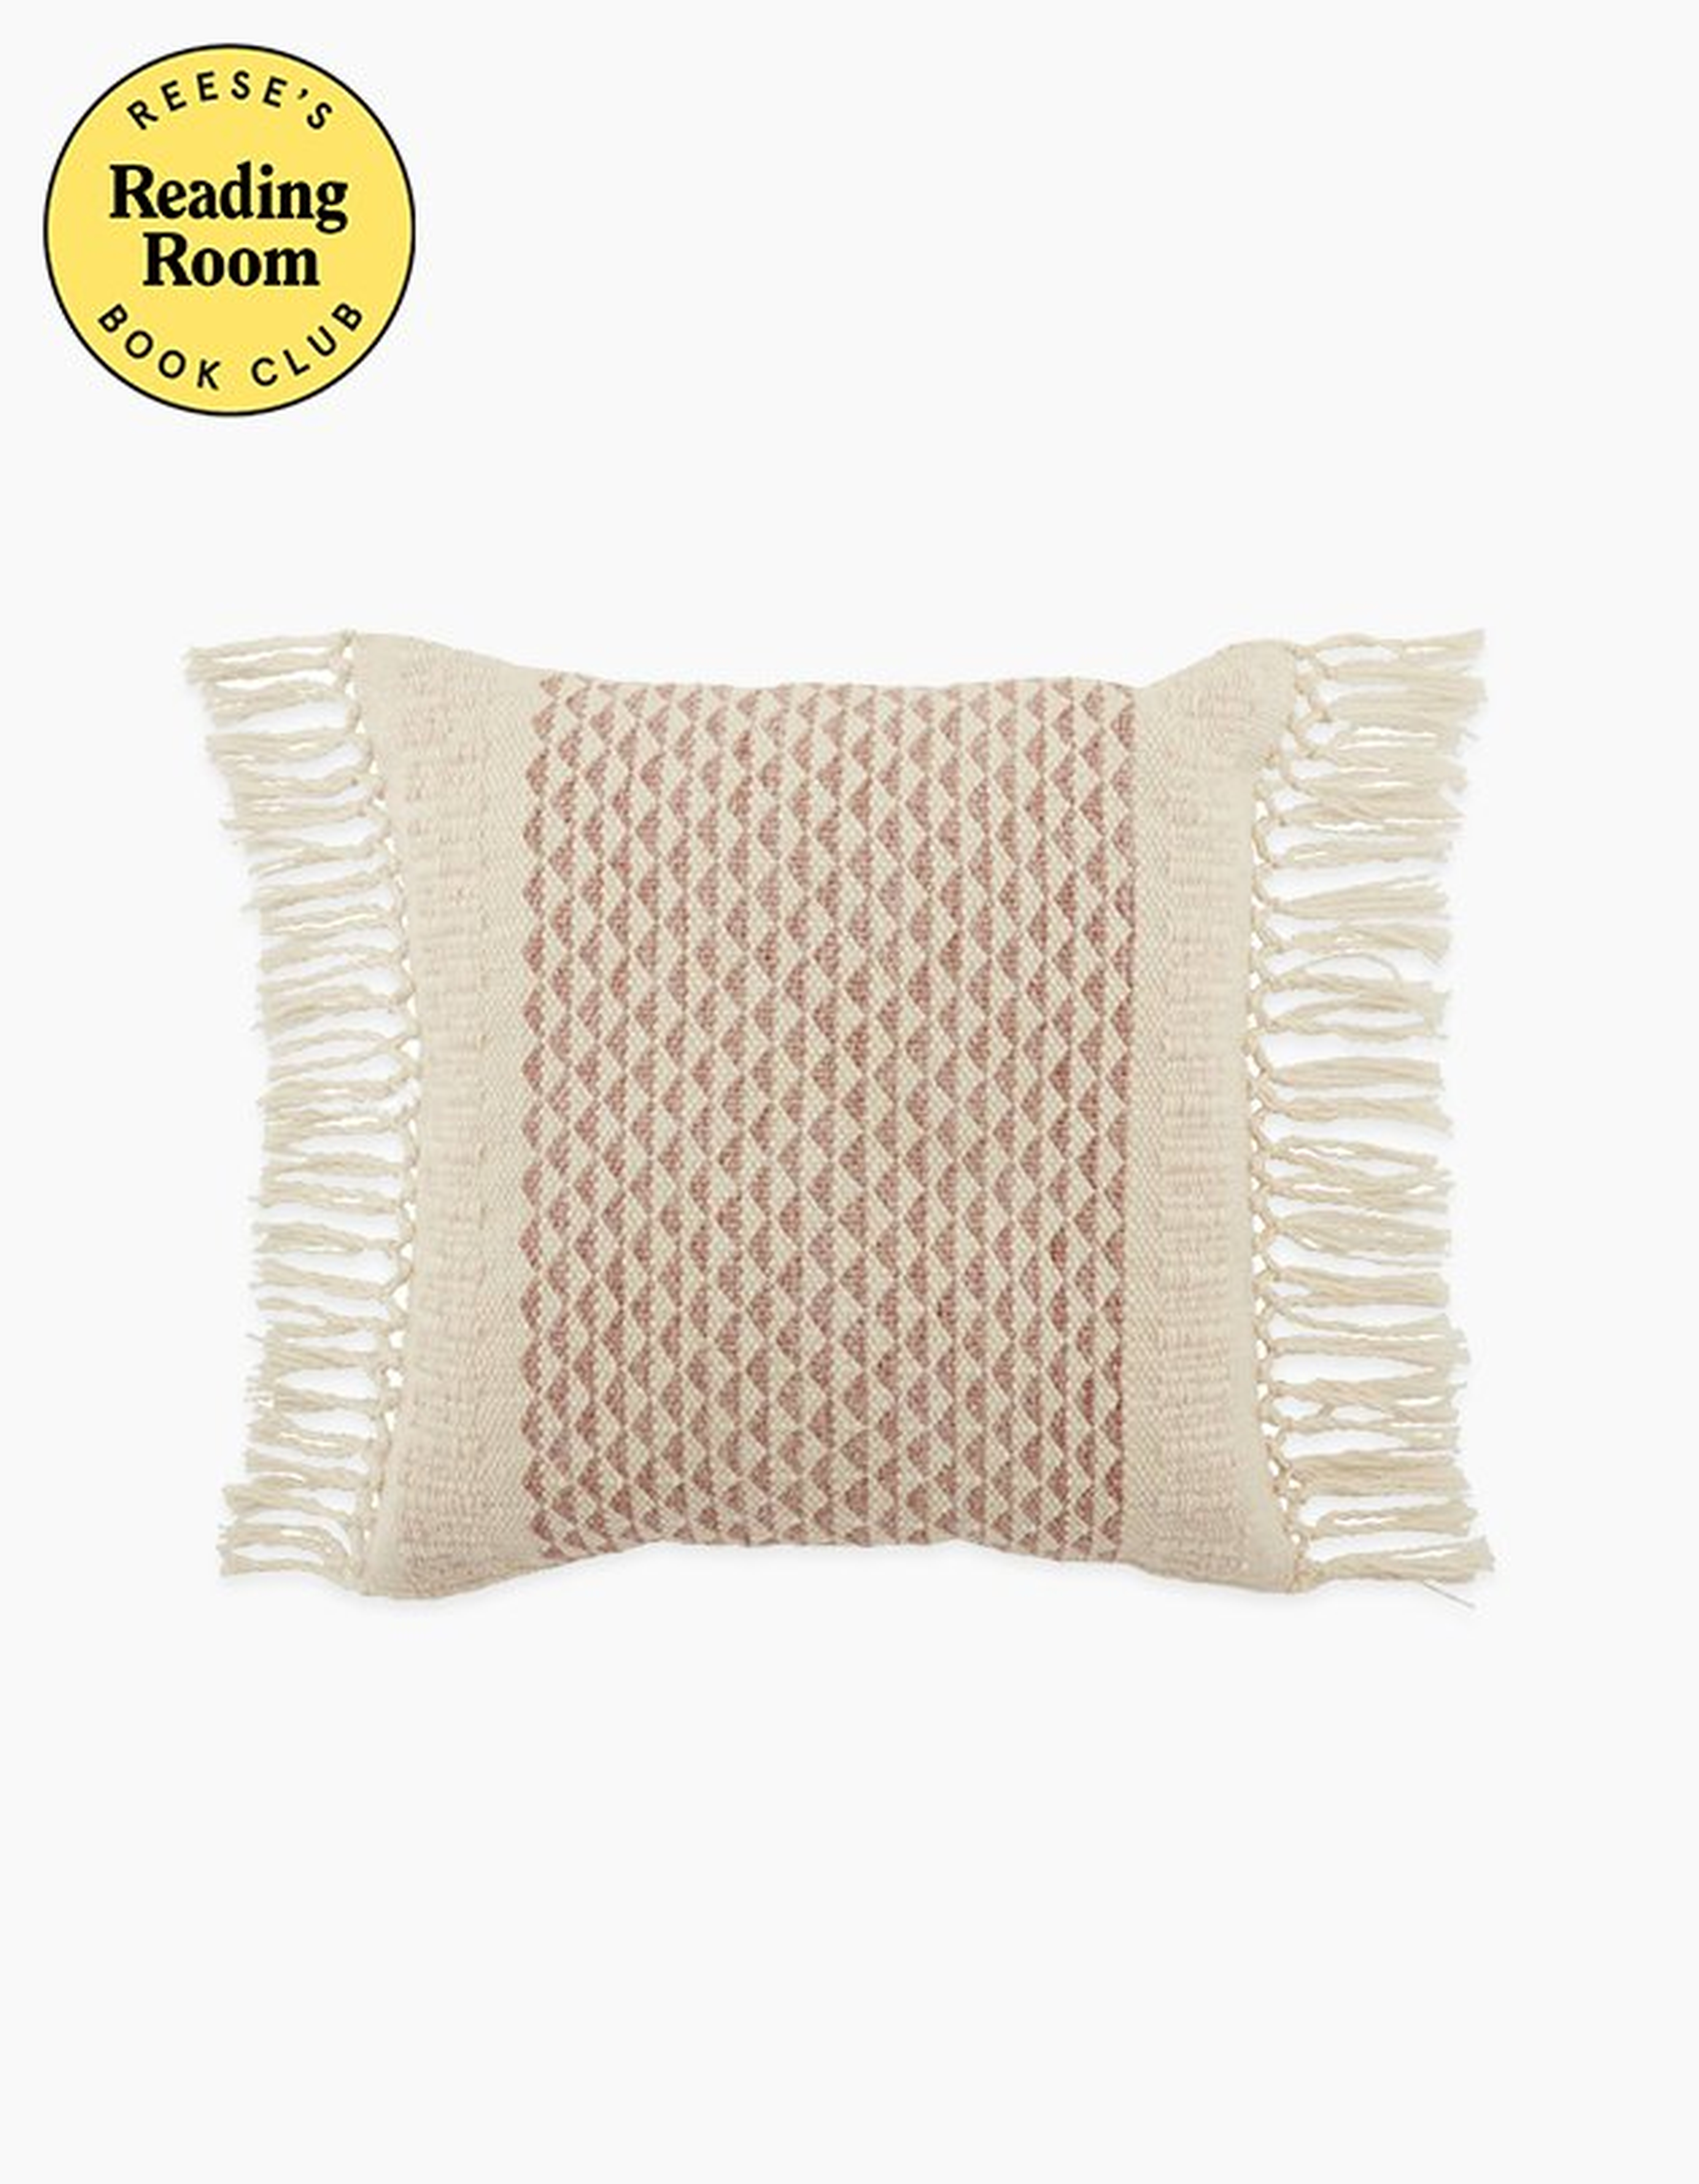 18" Fringe Pillow - Rose - DISCONTINUED - Reese's Book Club x Havenly